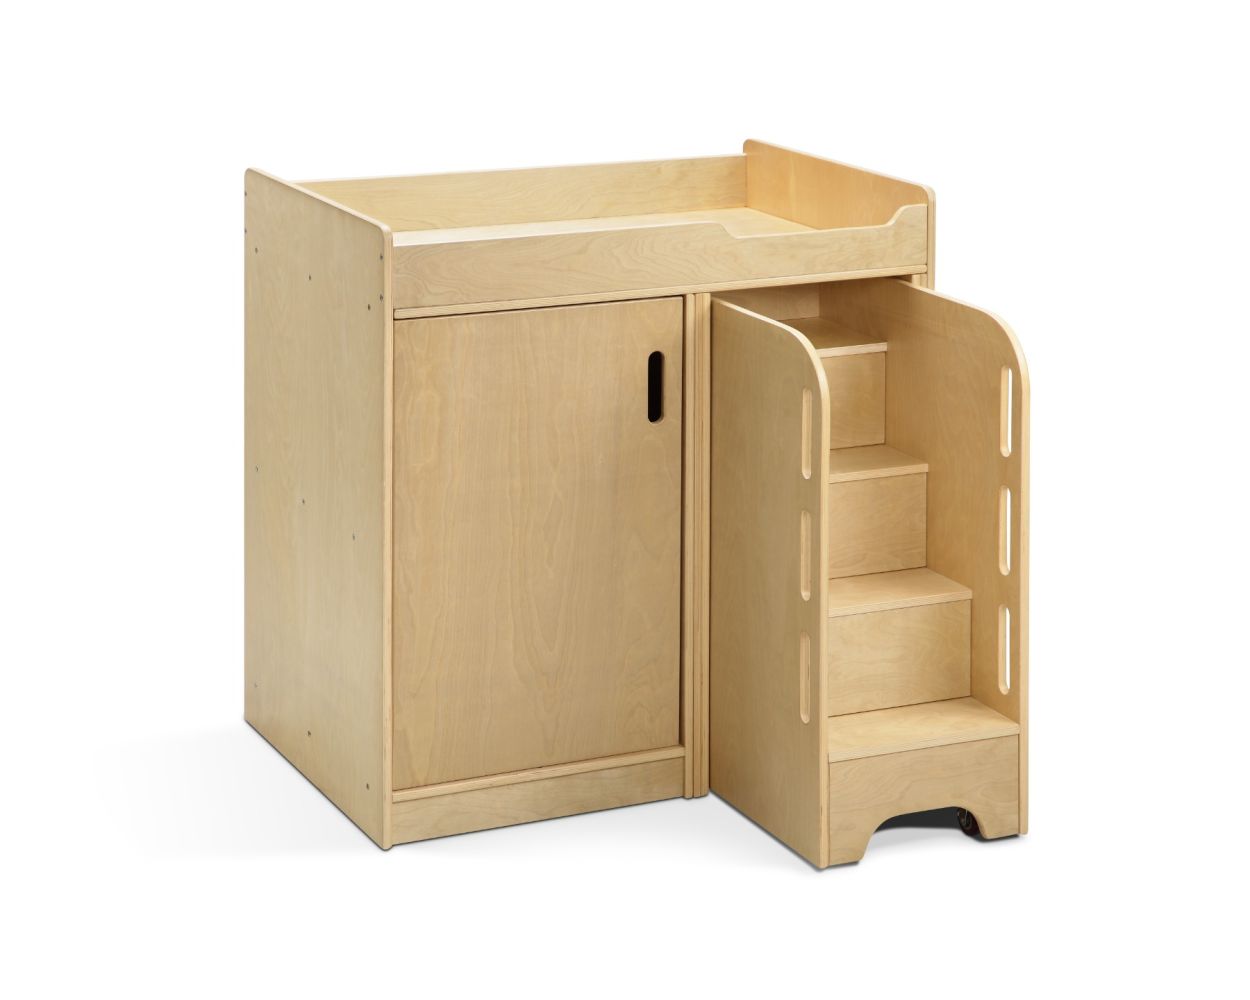 Wooden Child Care Nappy Change Storage Unit with Built-in Steps - Bino